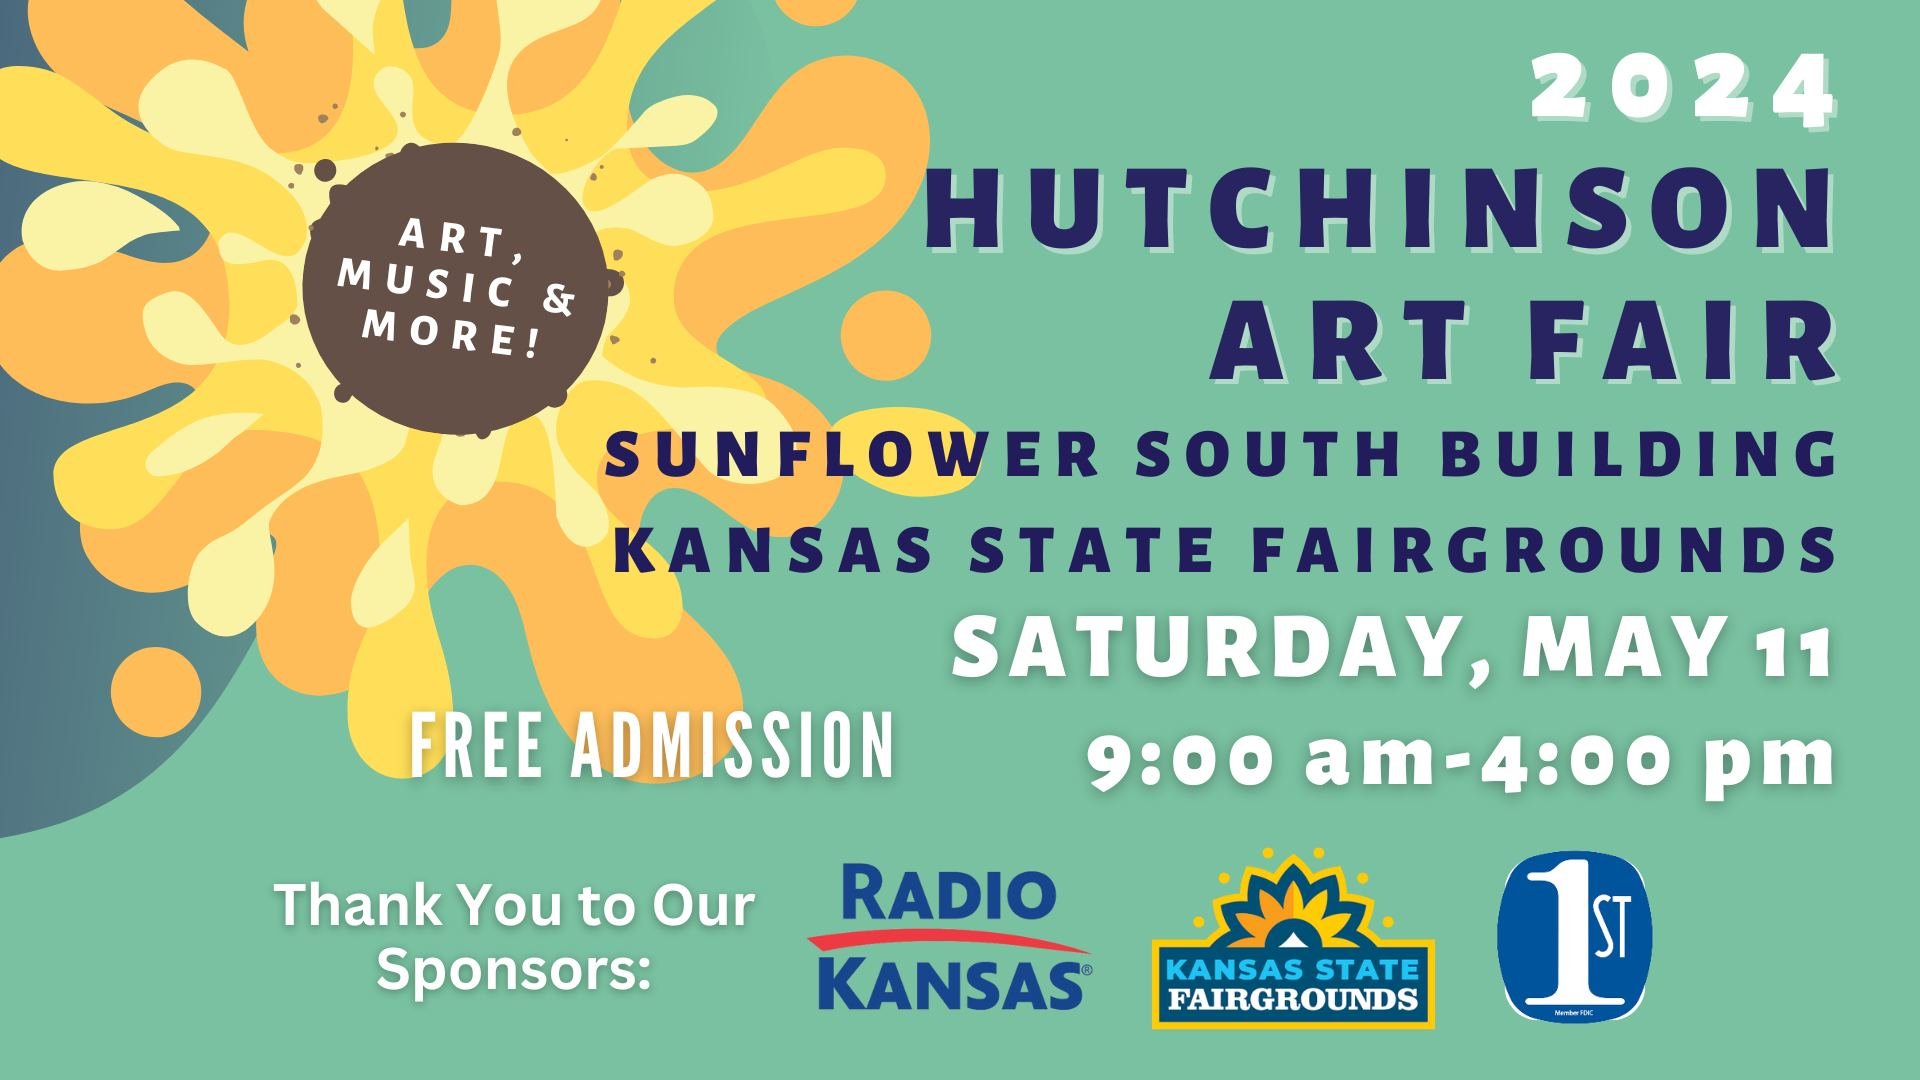 We are less than a month away from the 2024 Hutchinson Art Fair!

Join us at the Sunflower South Building on the Kansas State Fairgrounds from 9:00 AM to 4:00 PM to browse over 40 artist booths, enjoy live music, grab a kids swag bag, and more!

The 